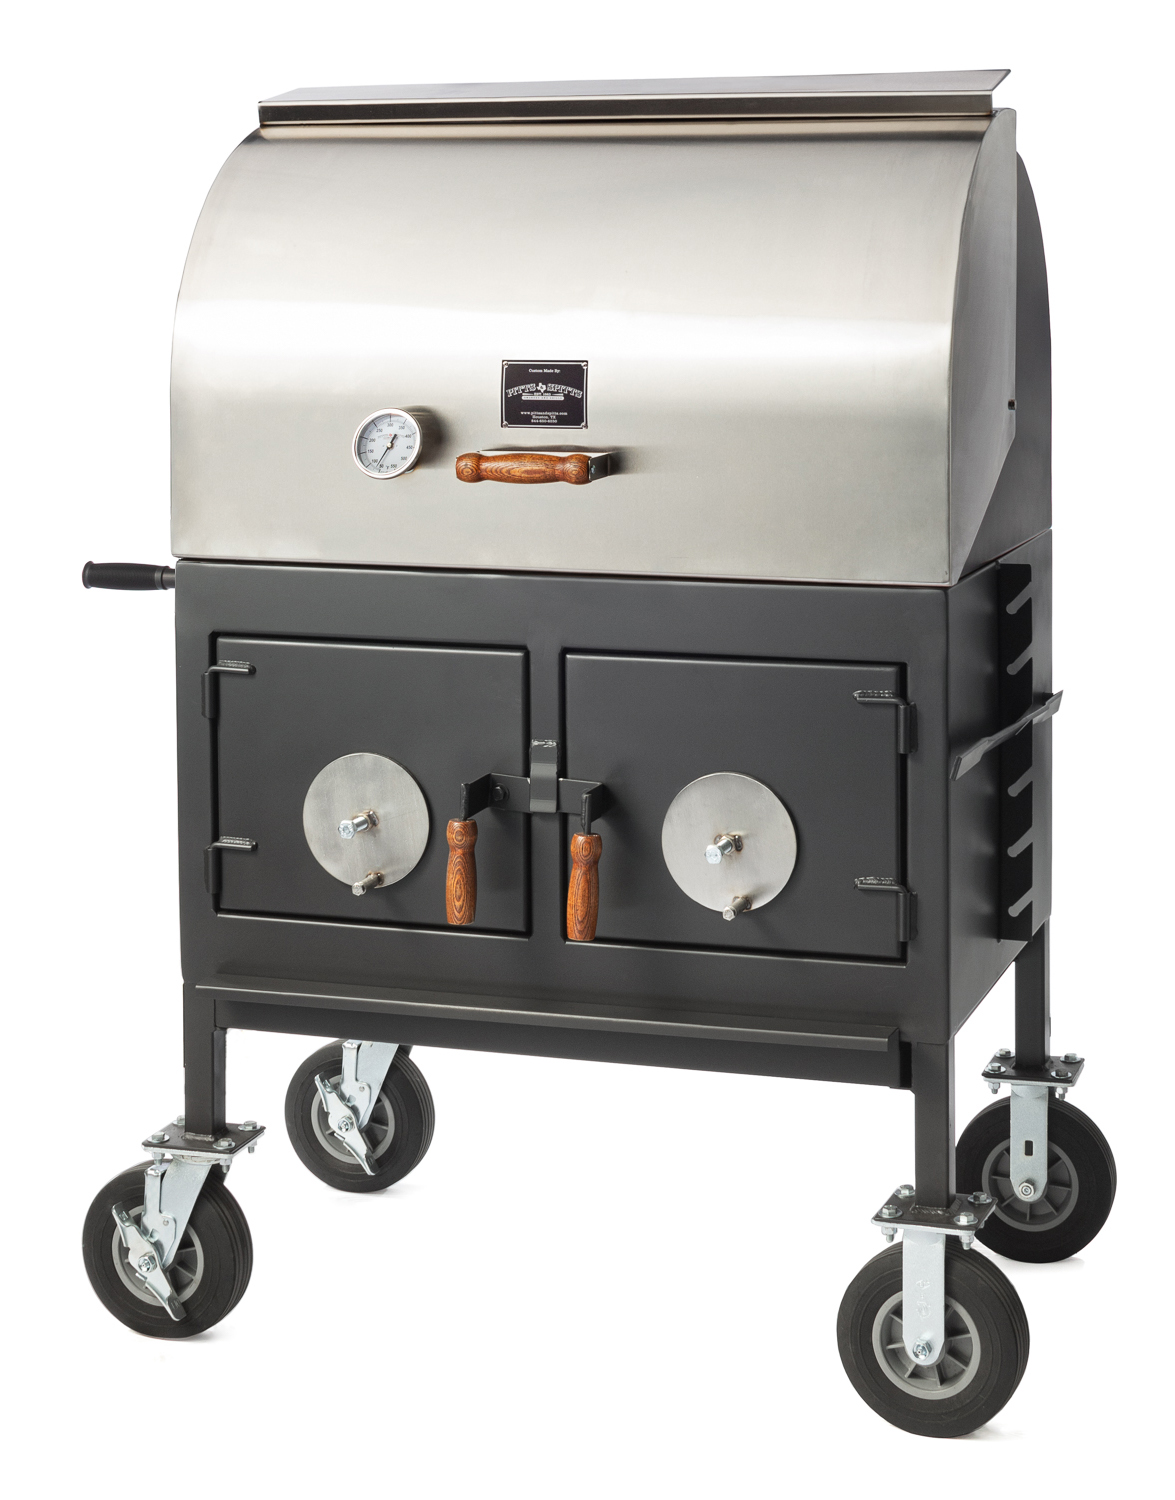 Basics 317 Square Inch Charcoal Grill, Black, 36.4 x 20.5 x 40.1 in